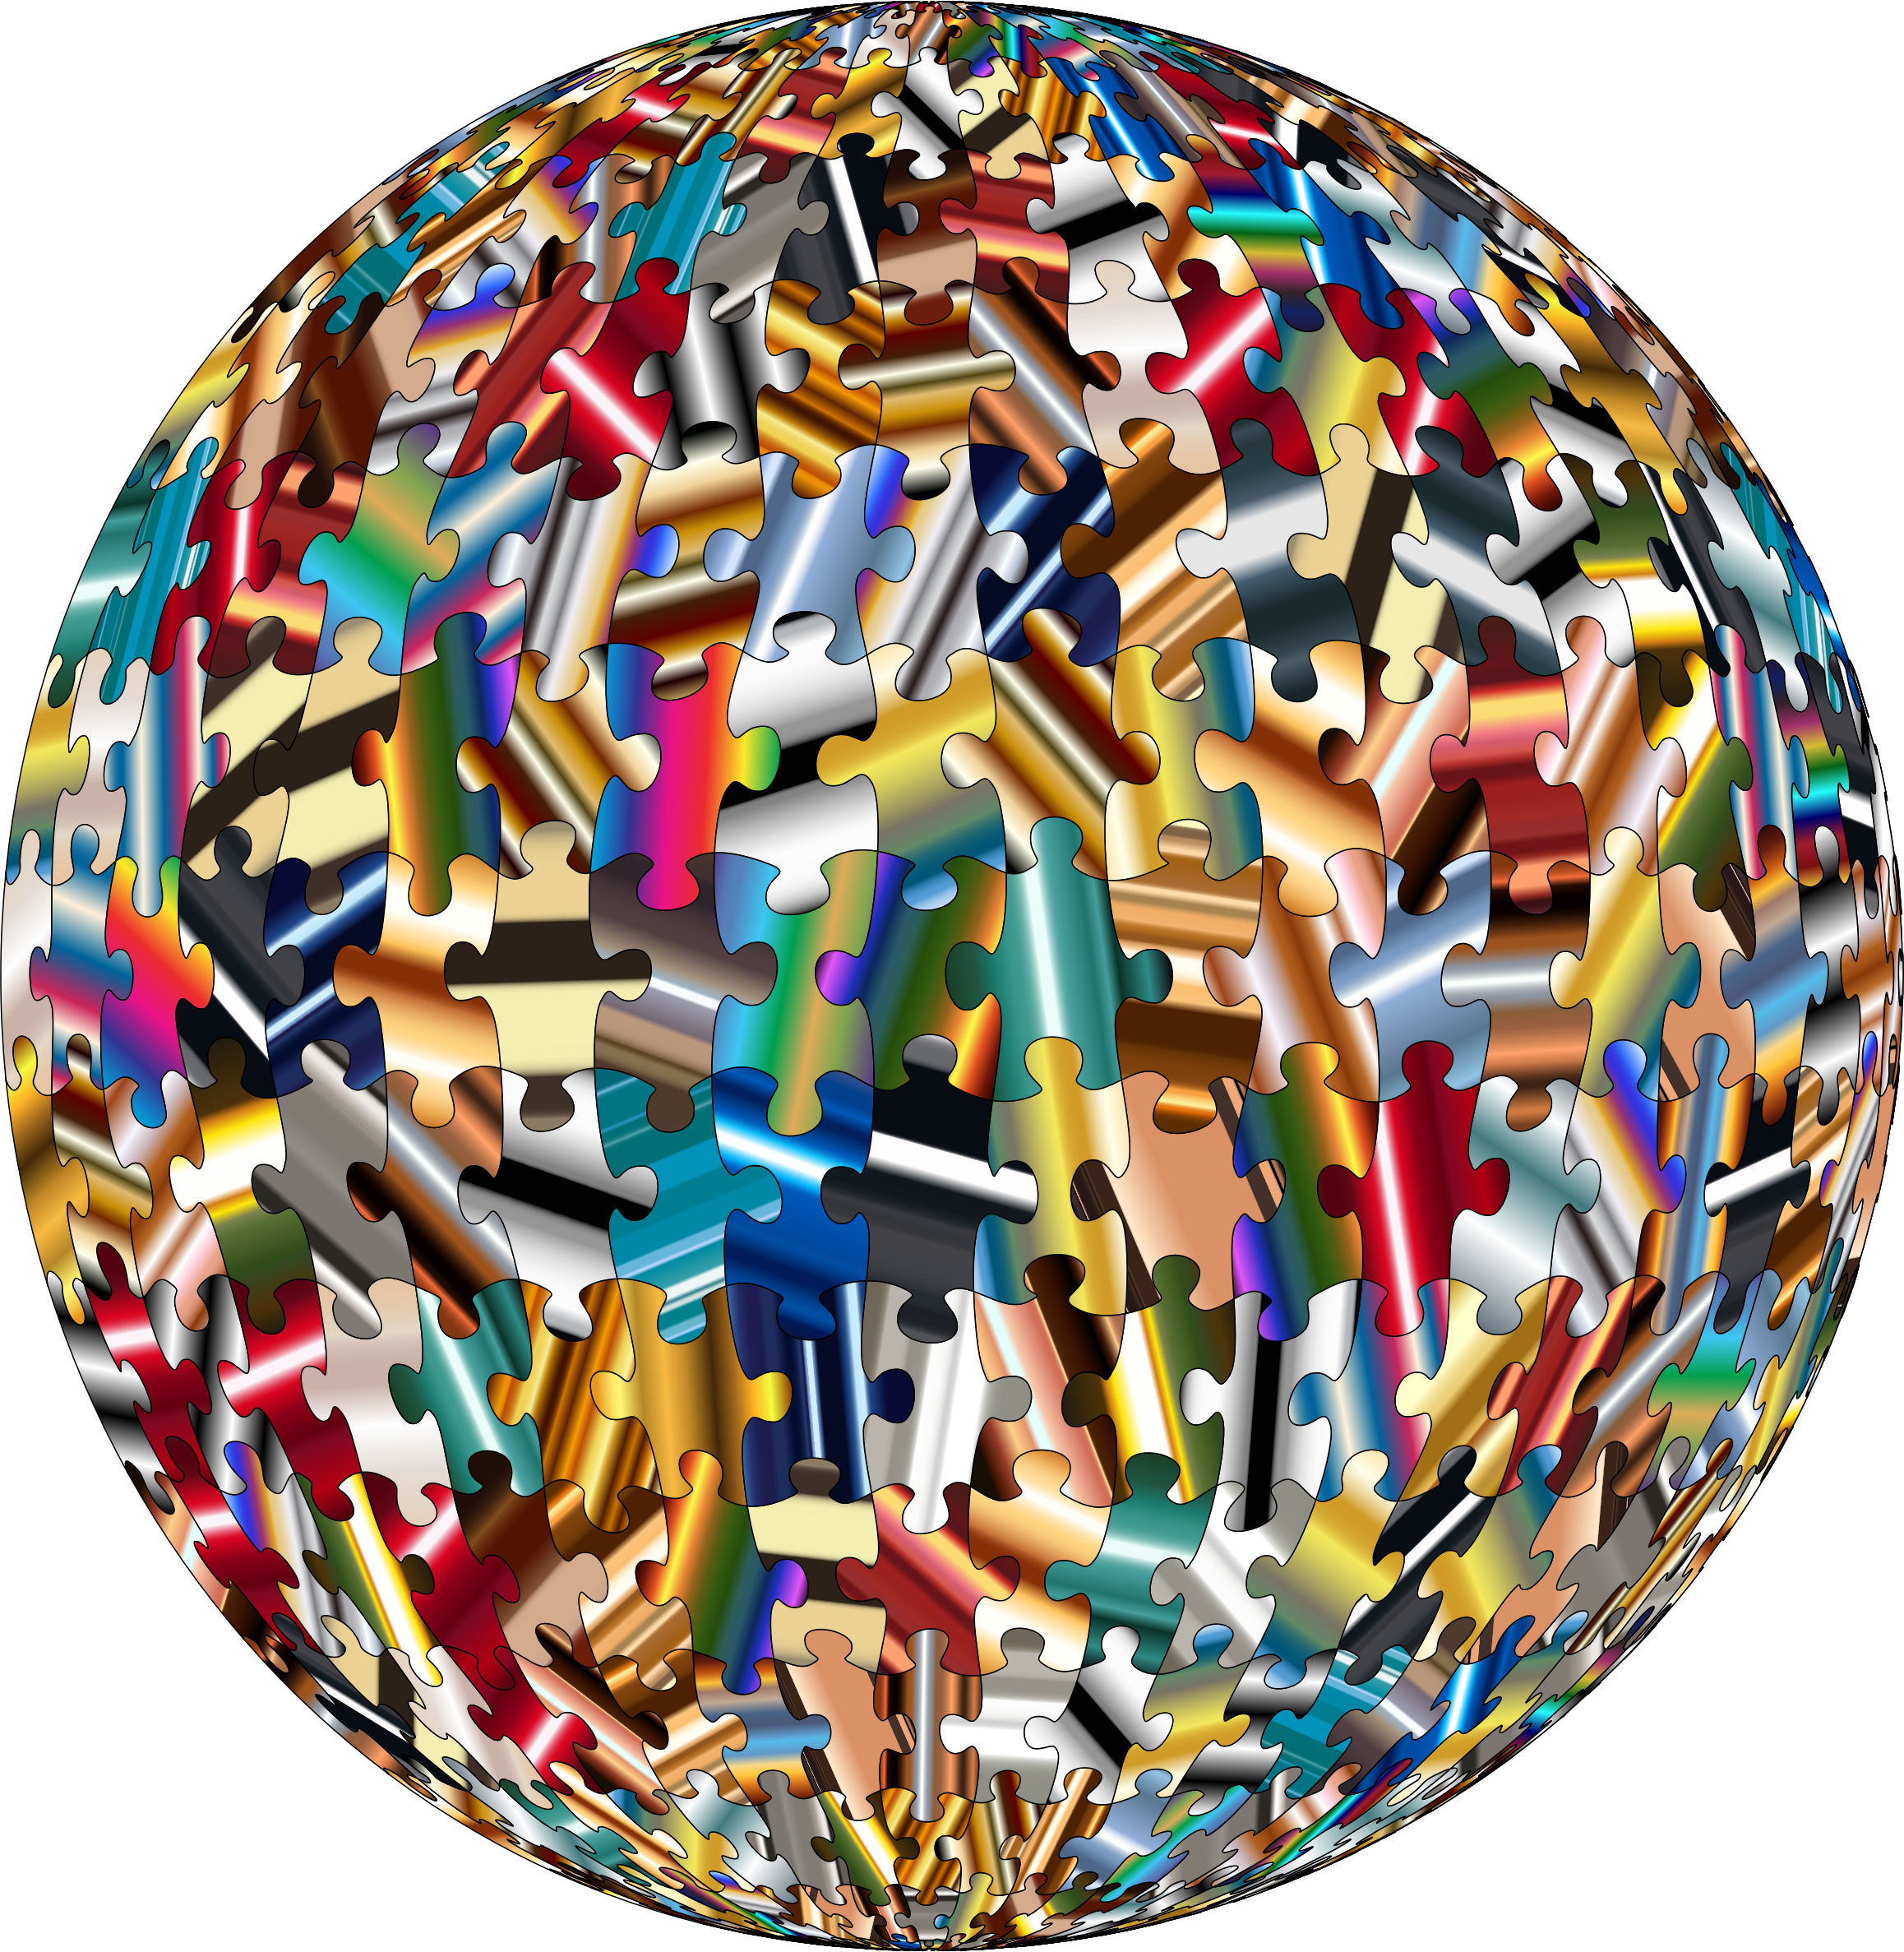 A Puzzle Ball With Many Pieces Of Puzzle Pieces